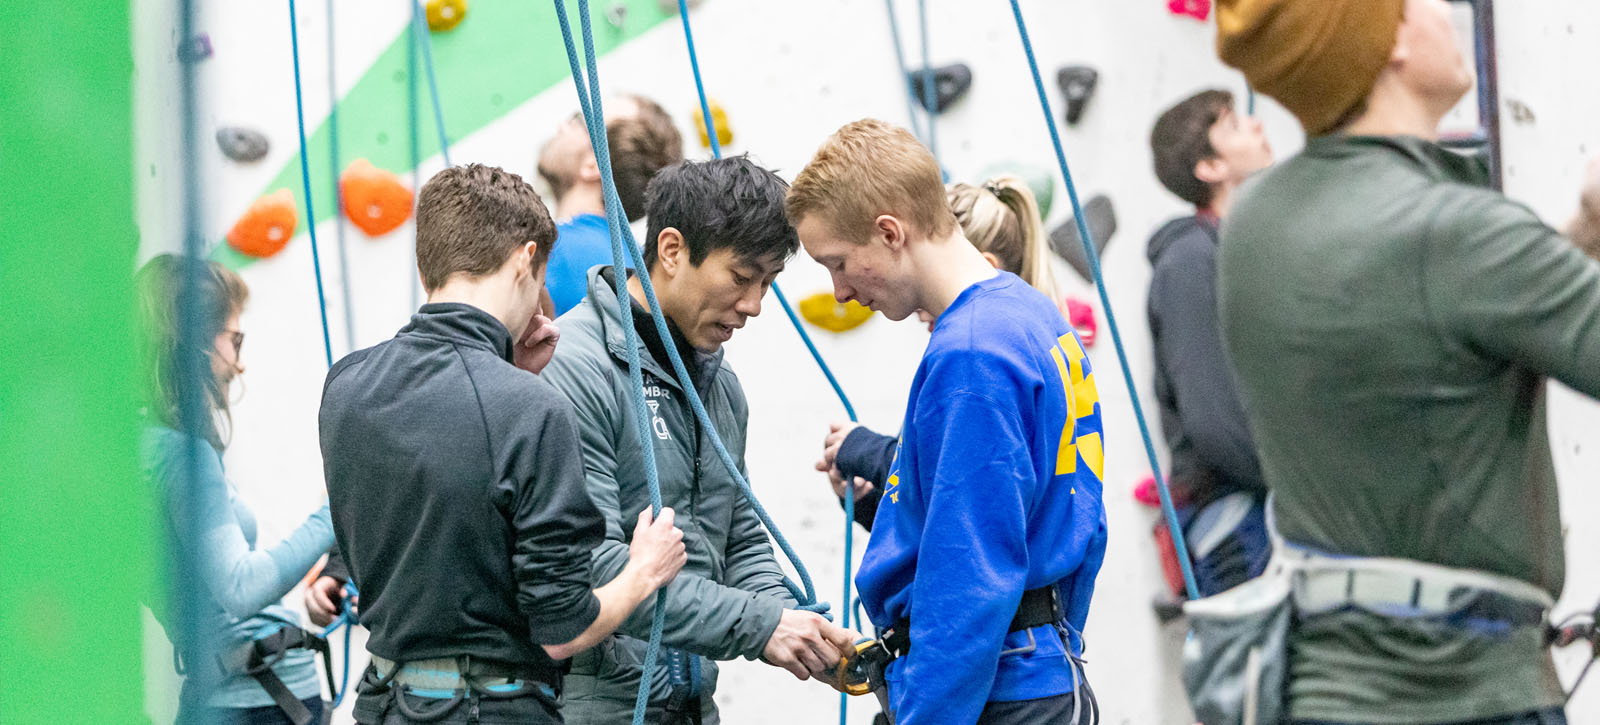 Climbing instructor showing climbers how to tie in to rope